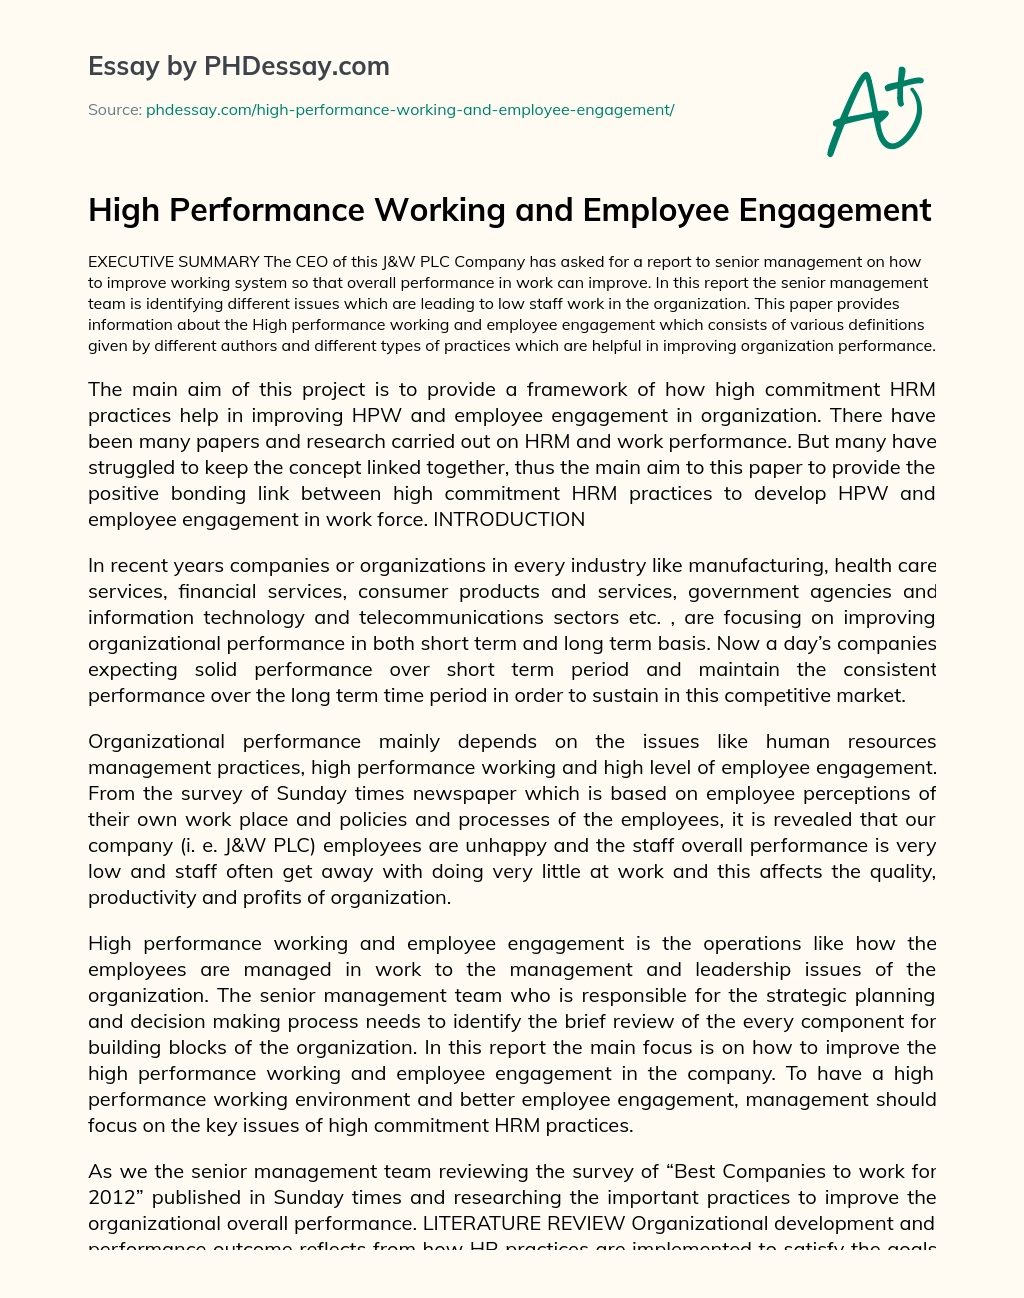 High Performance Working and Employee Engagement essay